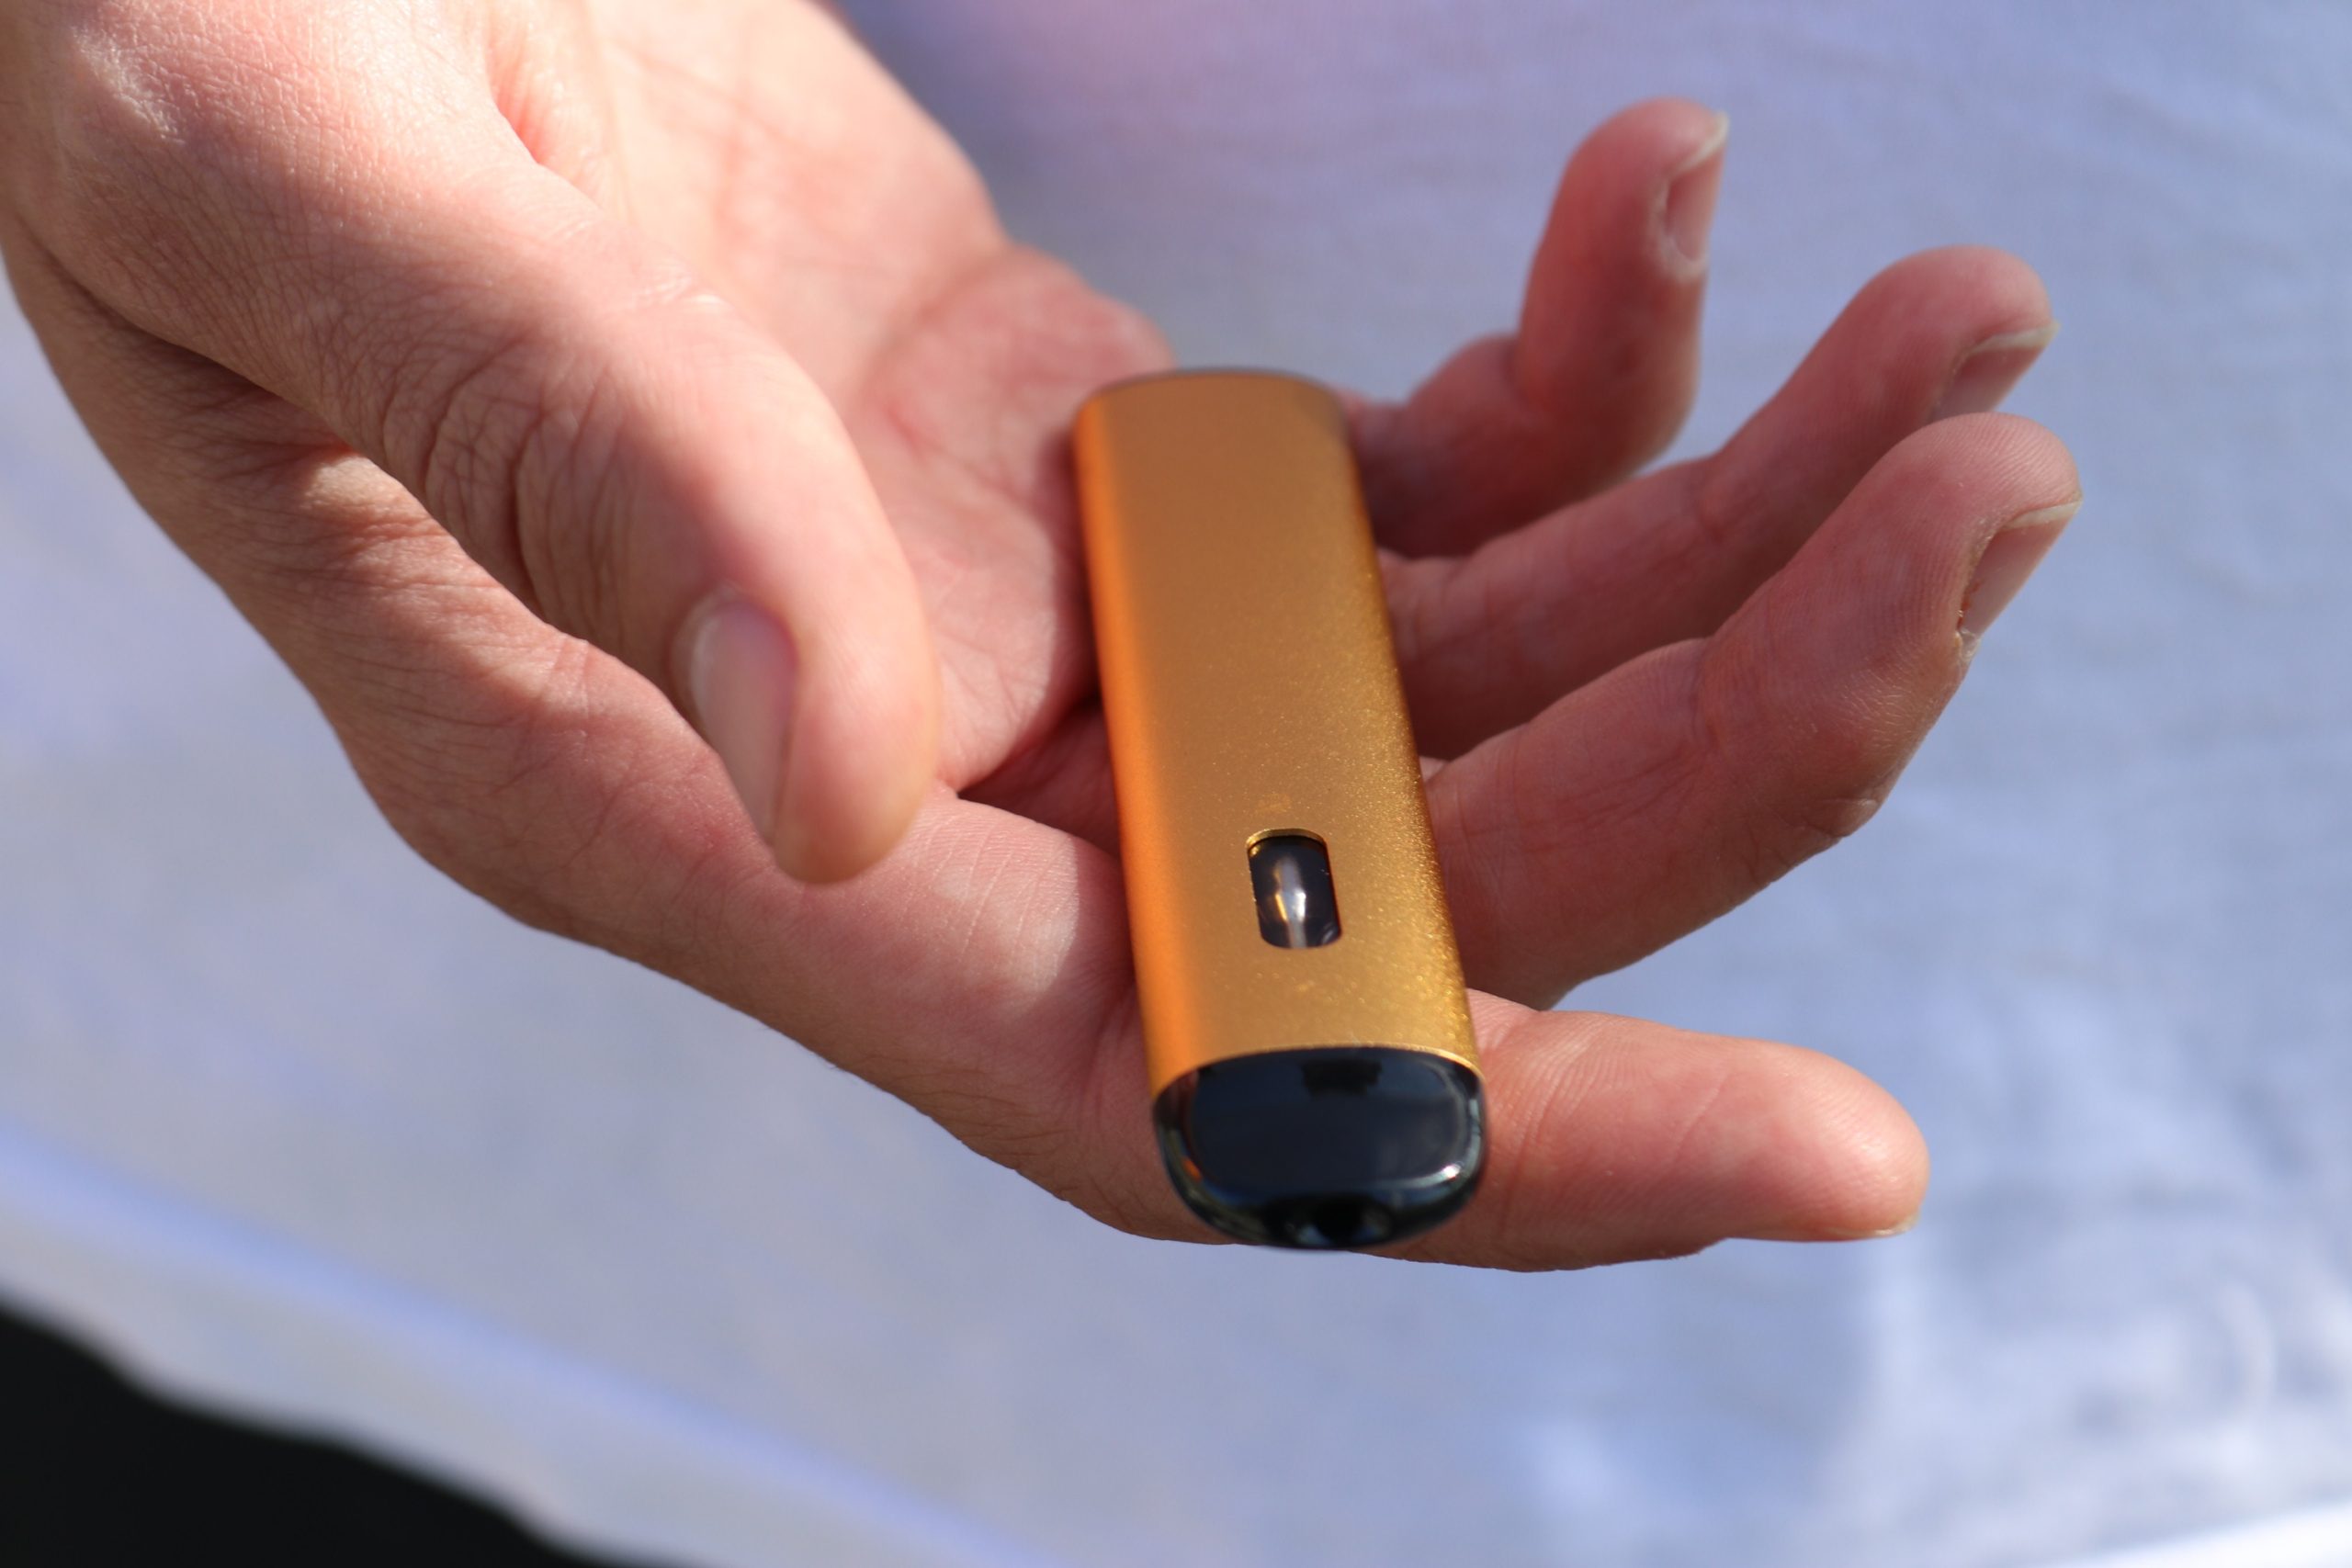 An orange vape pen is placed in an open hand. It's an illustration of the several cannabis vape types available for purchase in New Jersey.